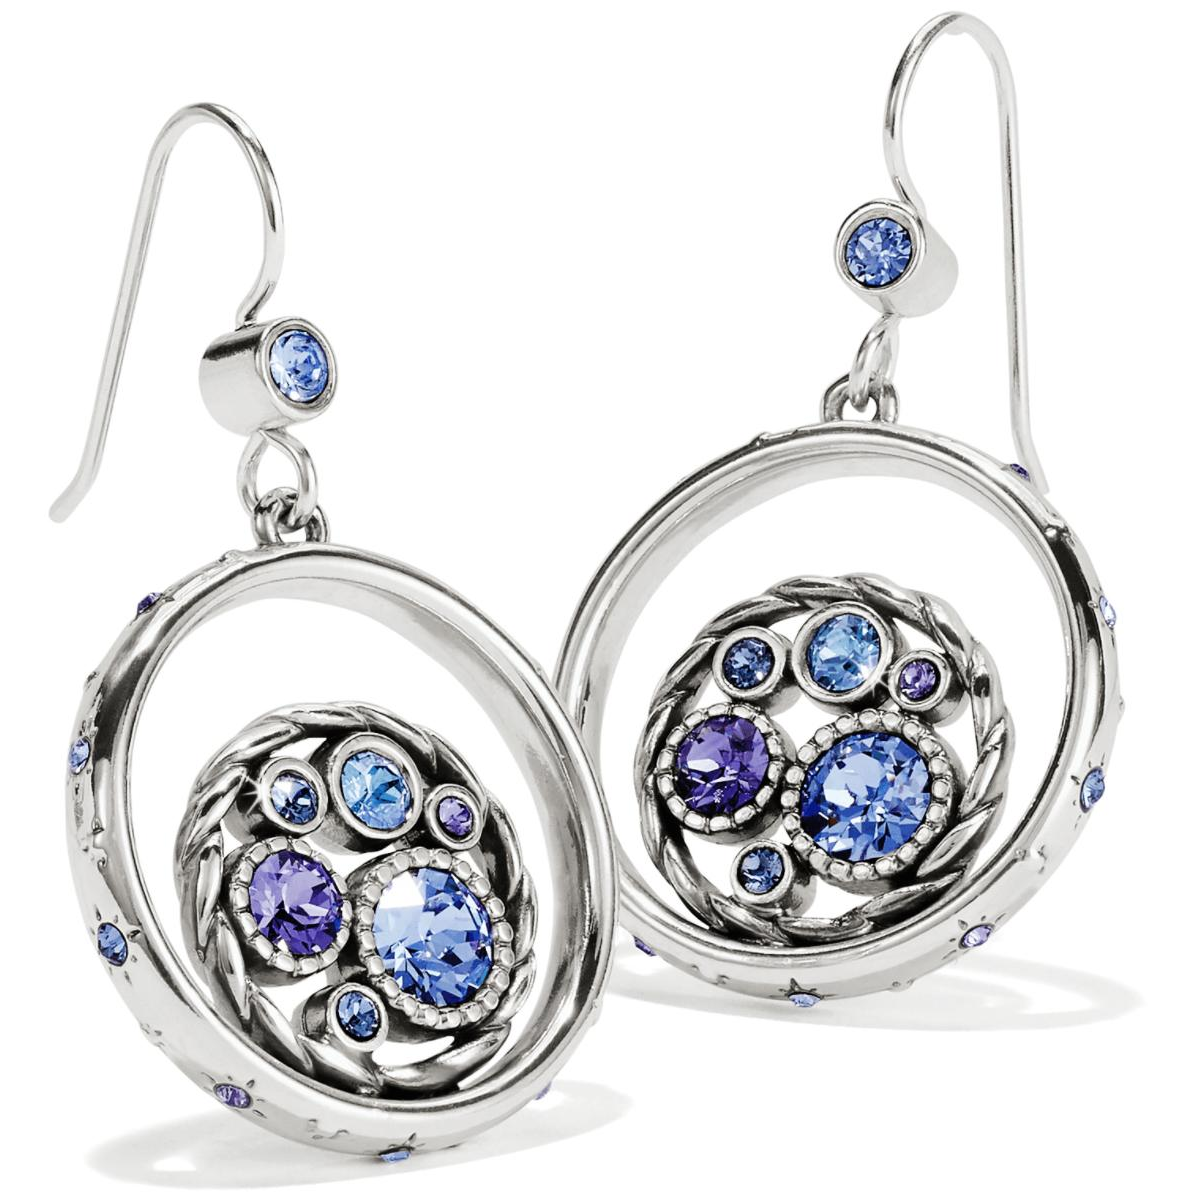 Halo Tauri French Wire Earrings - Zinnias Gift Boutique